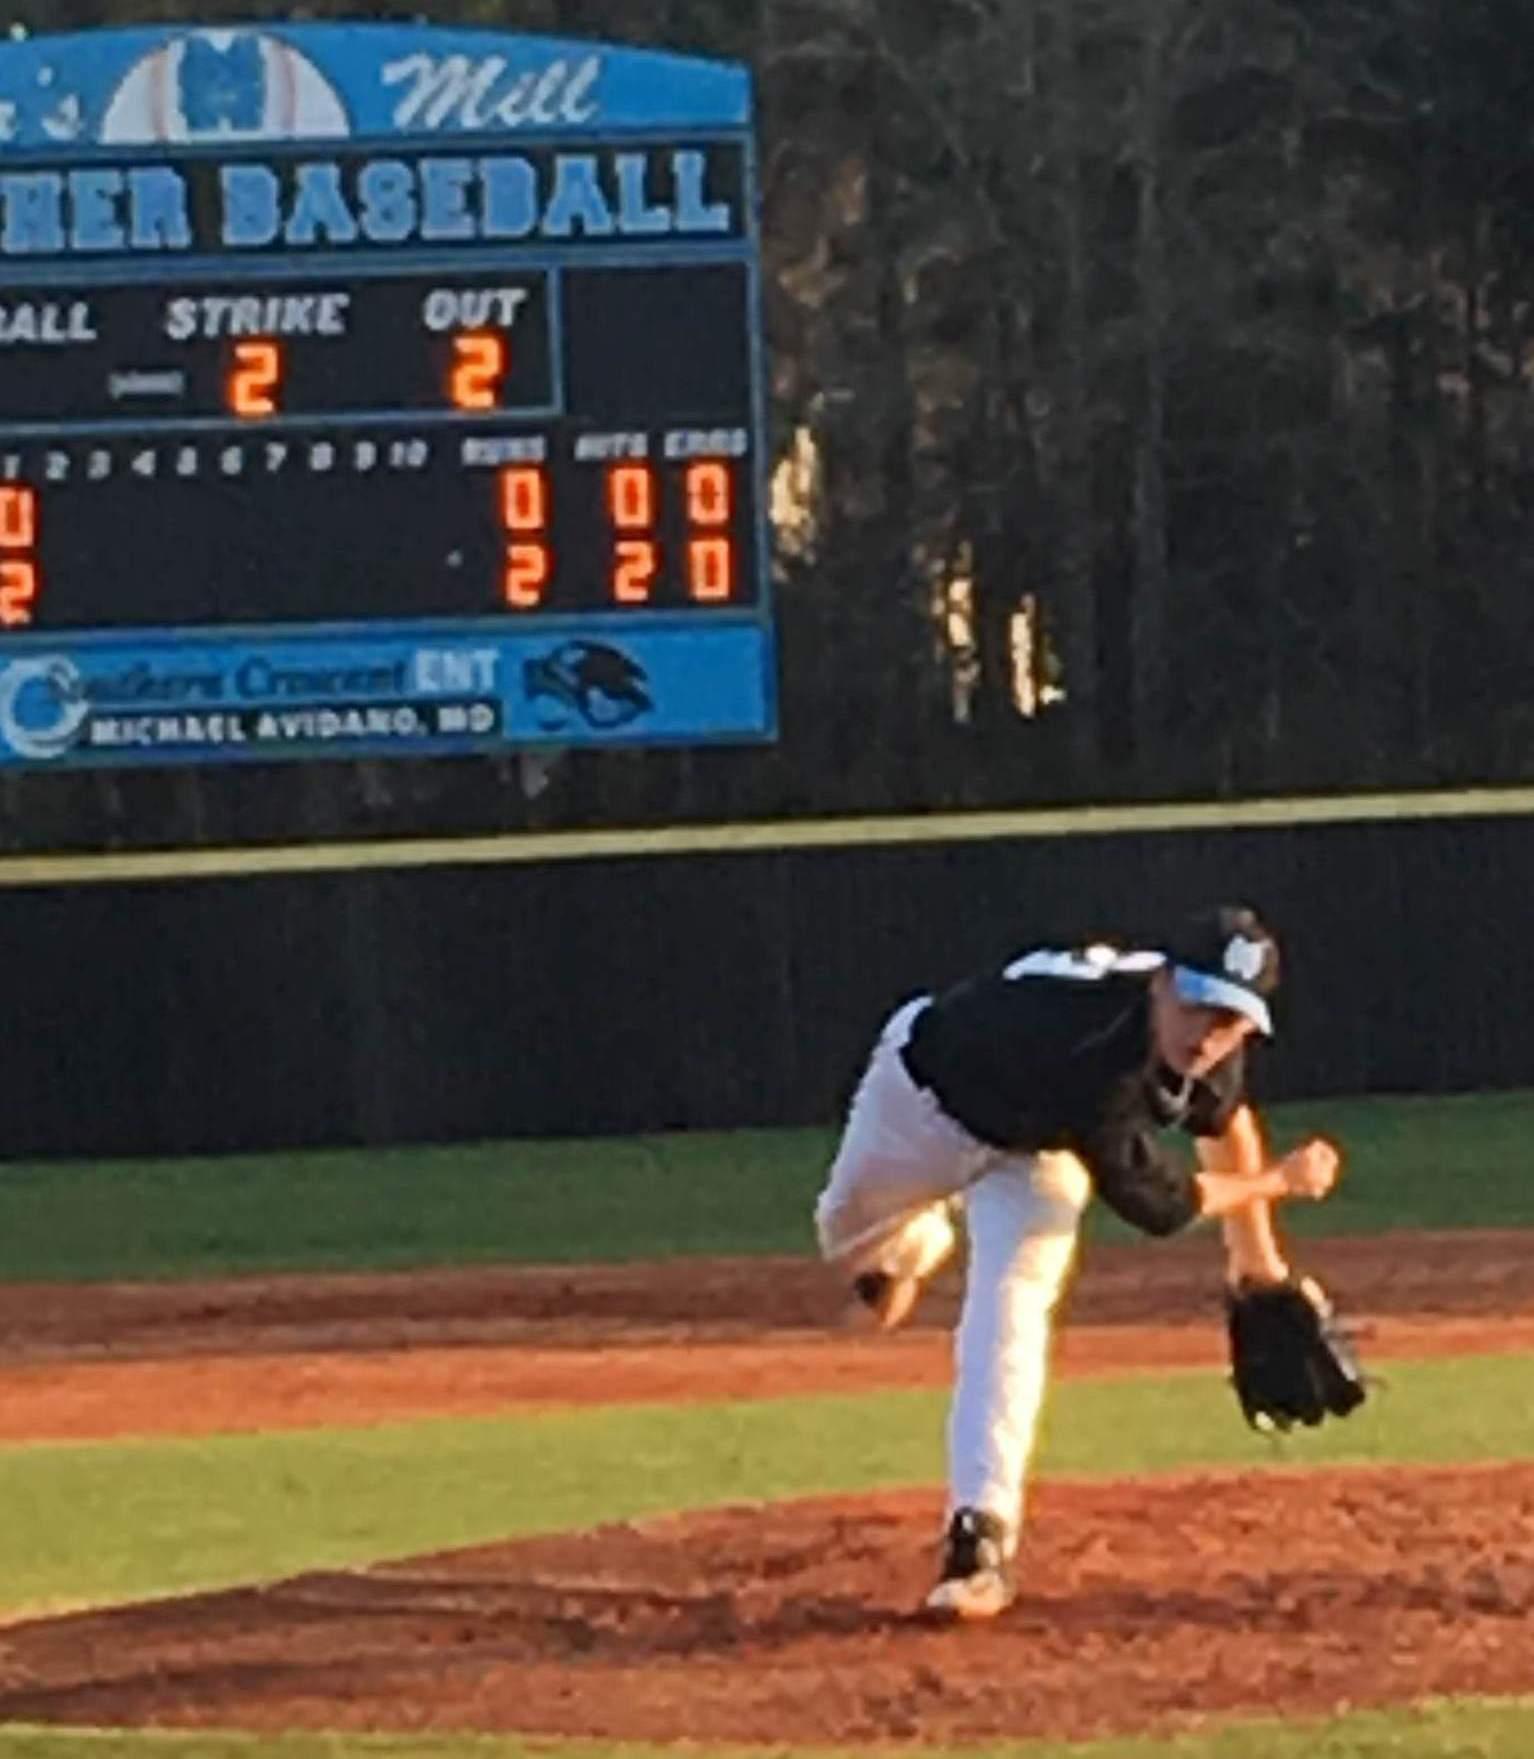 March 7, 2016 - Senior Richie Post looks for an 0-2 strikeout to end the top of the second inning. Post went on to throw four solid innings without allowing a single hit.